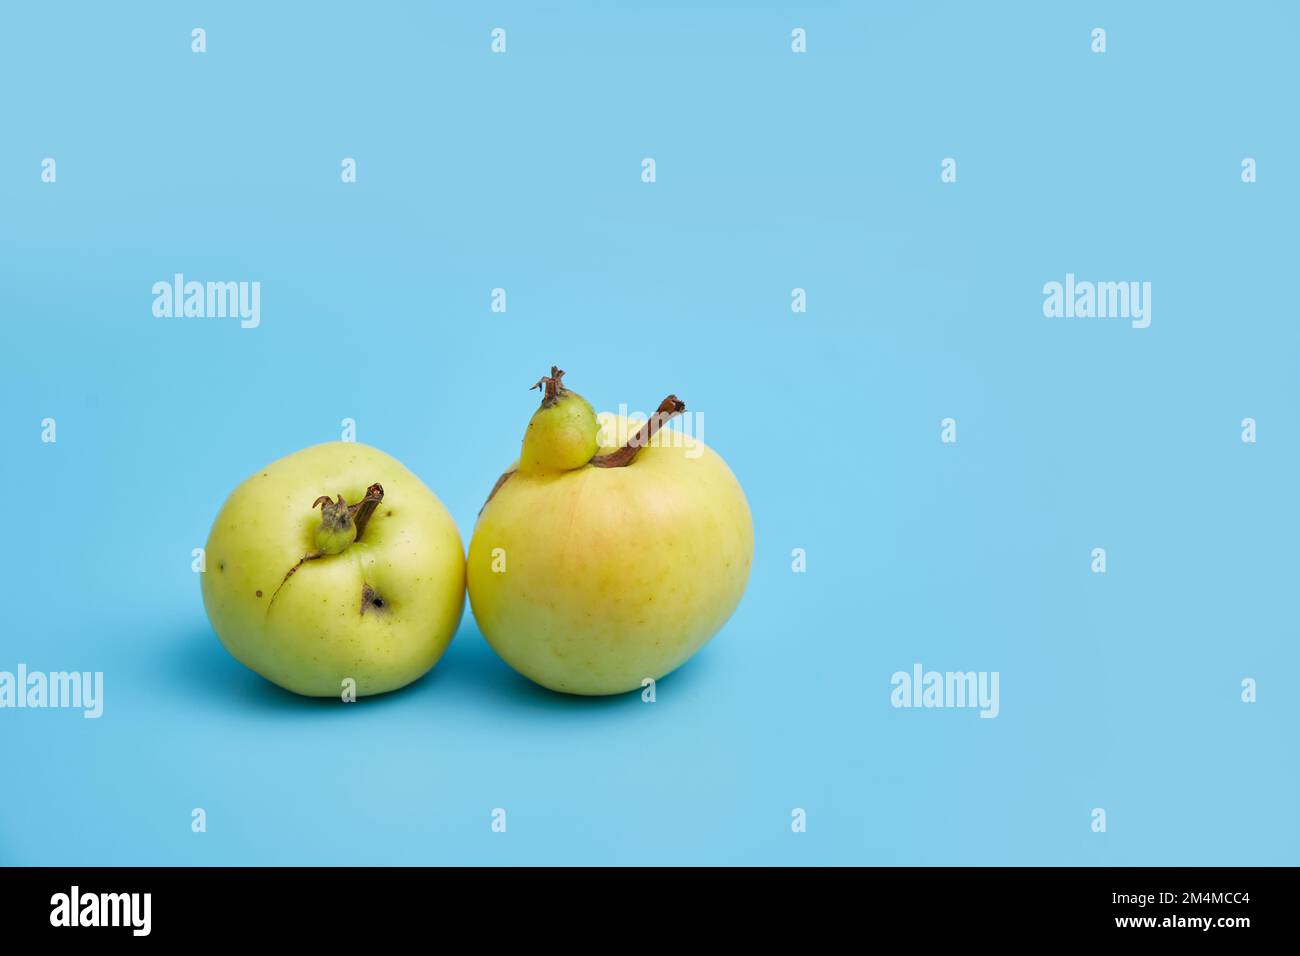 Two ugly yellow apples on a blue background. Image with copy space, horizontal orientation. copyright. Funny, unusual fruit or food waste concept. Stock Photo